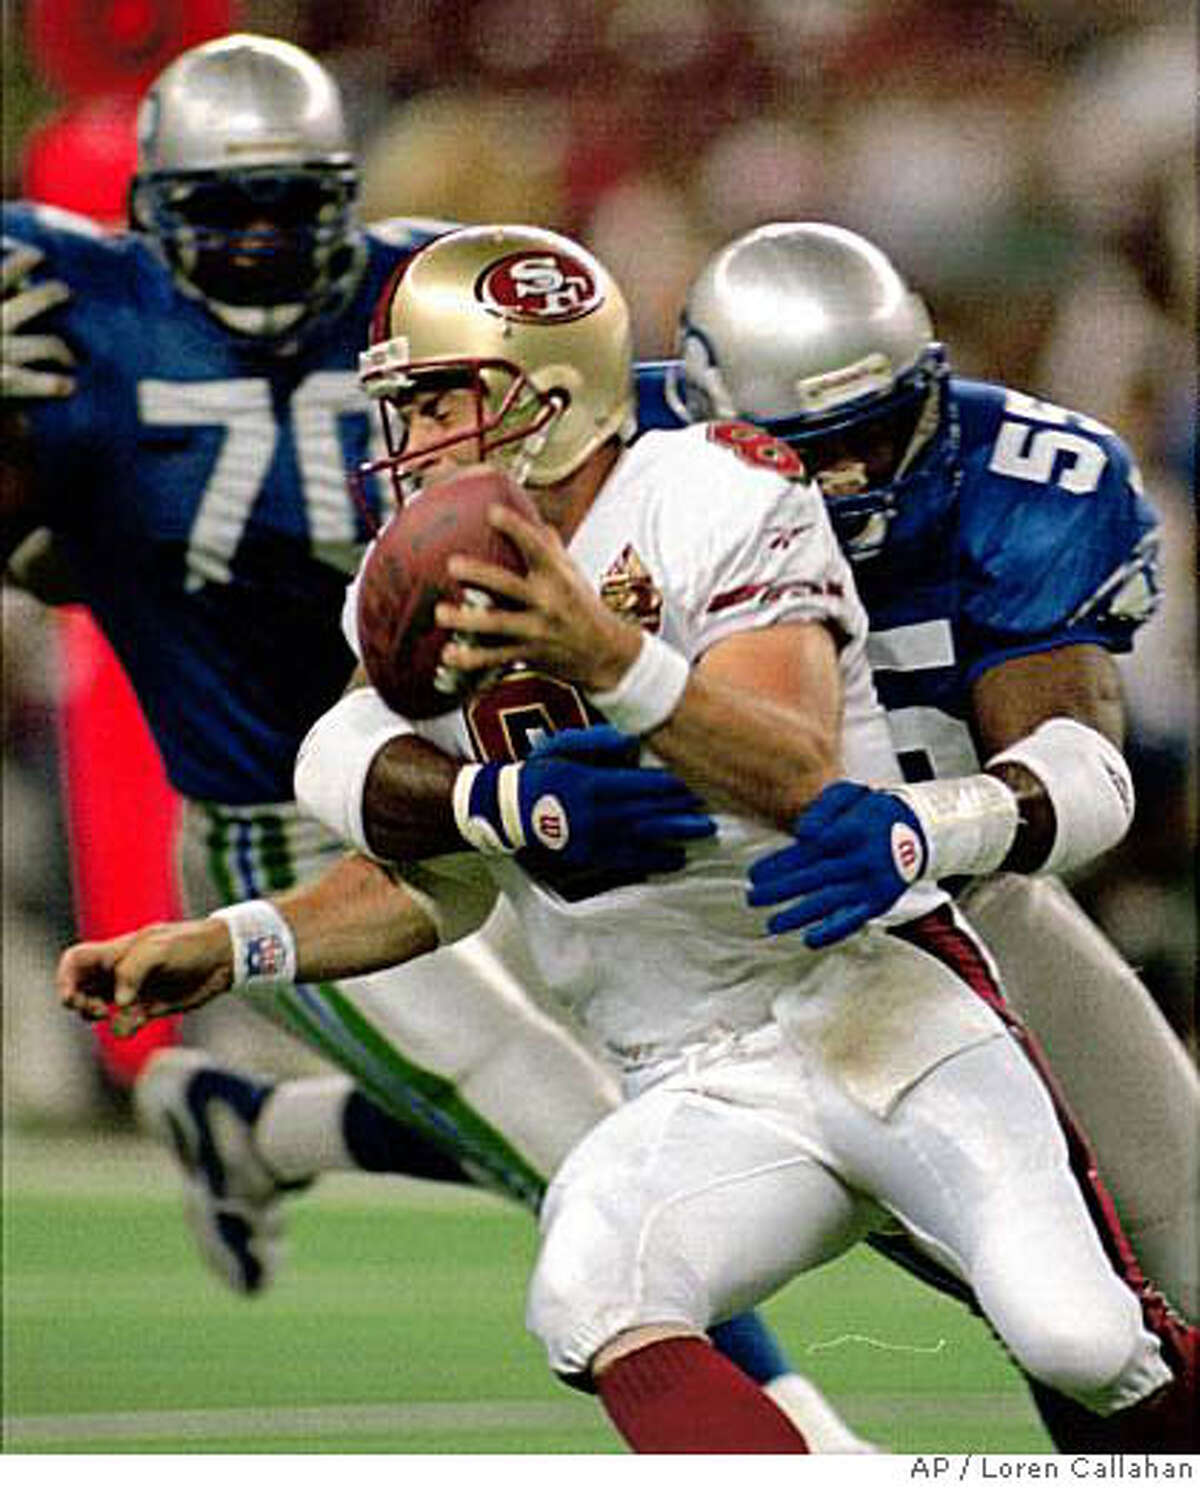 San Francisco 49ers quarterback Steve Young is wrapped-up in an early first-quarter sack by Seattle Seahawks' Winston Moss, as teammate Michael Sinclair (70) moves in Friday, Aug. 23, 1996 in Seattle. Young was tagged for a nine-yard loss on the play. (AP Photo/Loren Callahan)